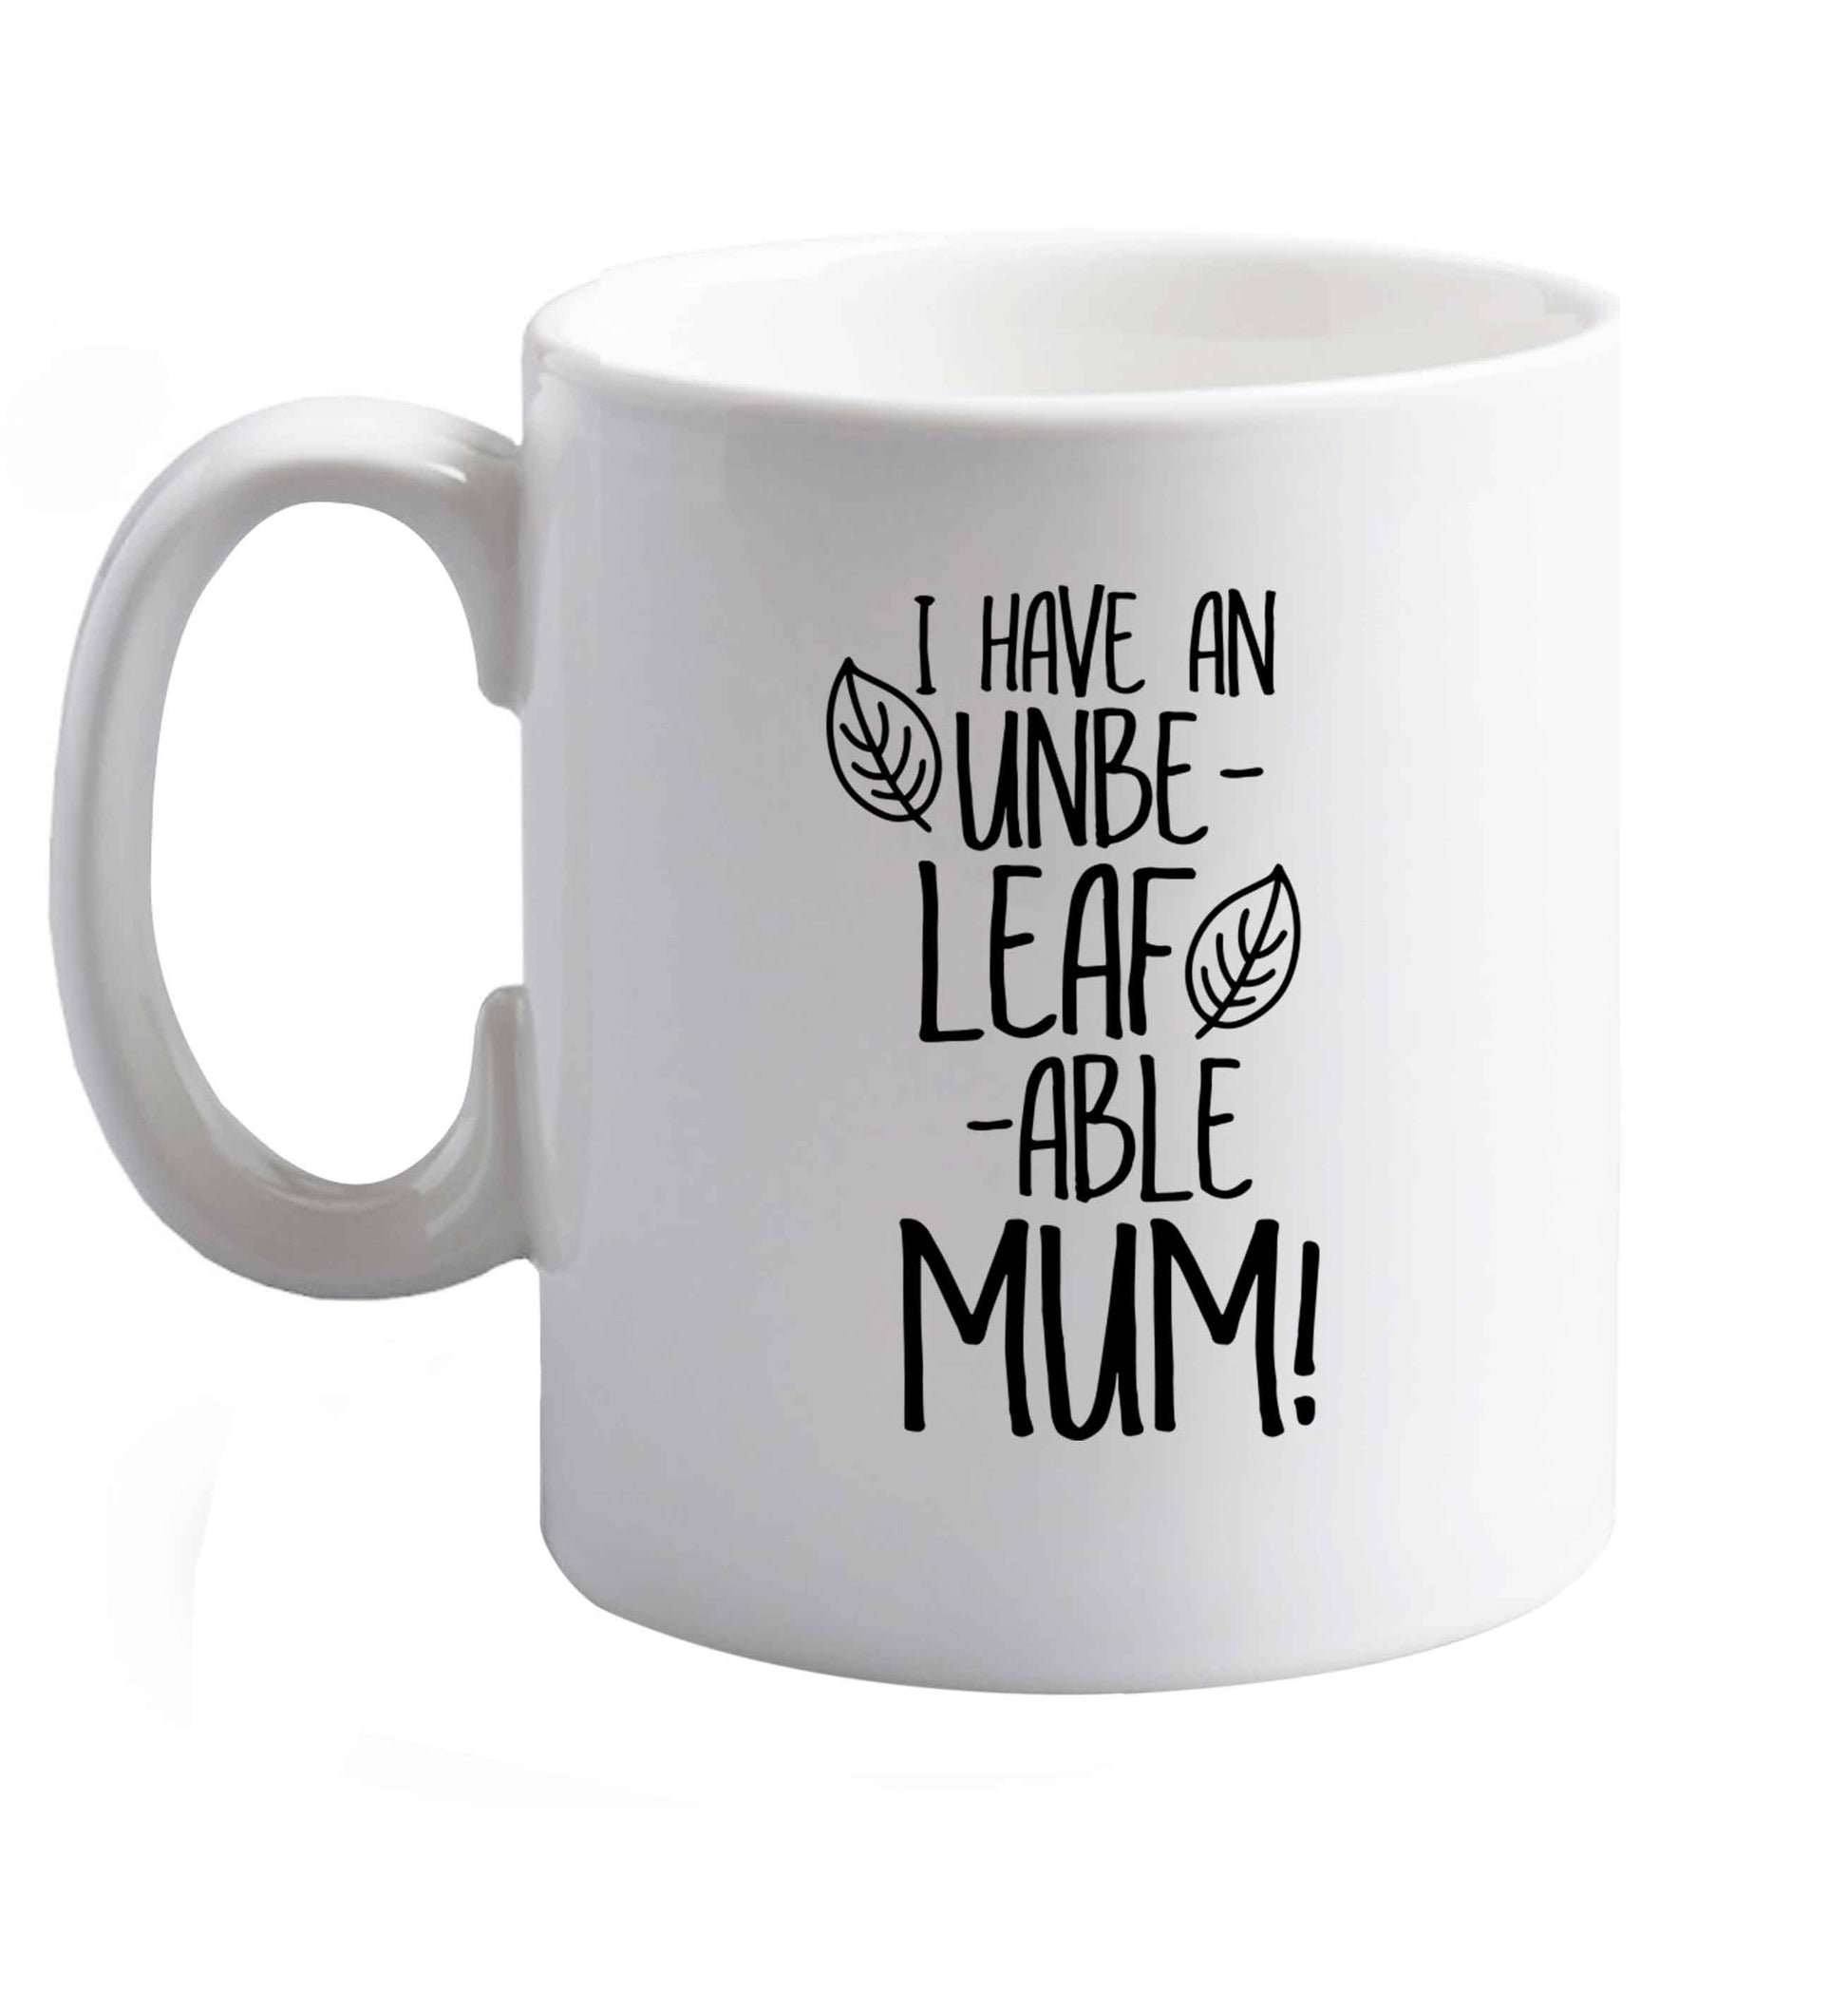 10 oz I have an unbeleafable mum! ceramic mug right handed